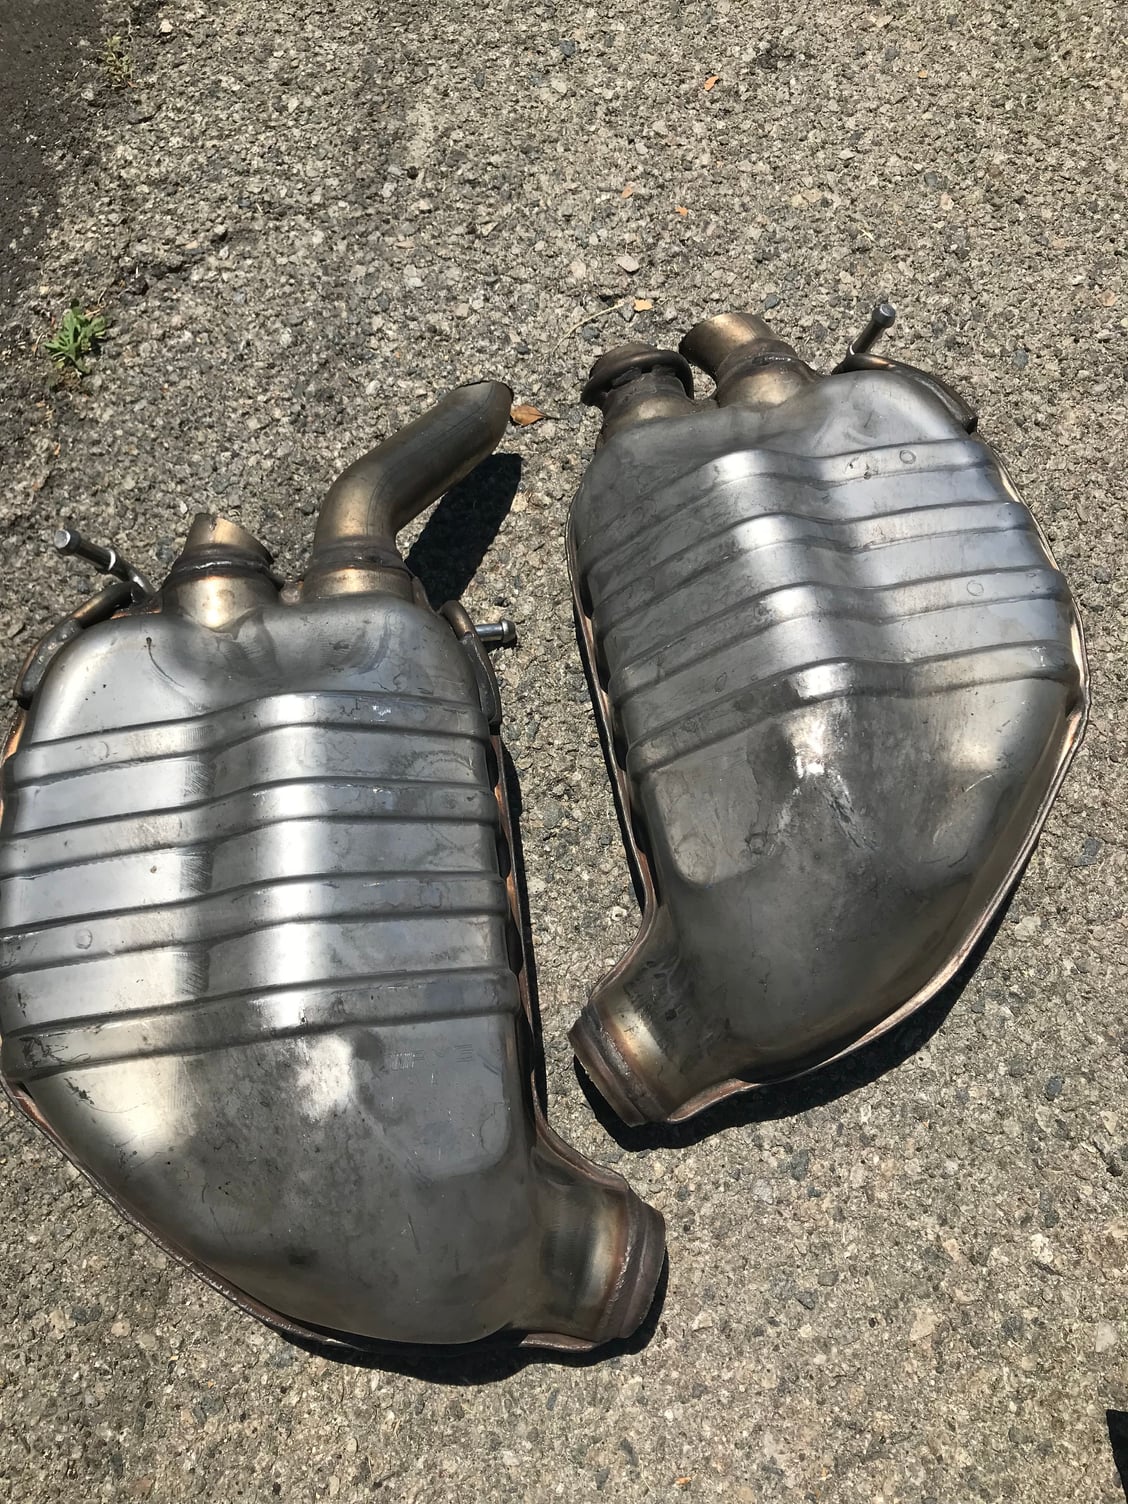 Engine - Exhaust - 2014 C63 Amg mufflers for sale - Used - Los Angeles, CA 93063, United States